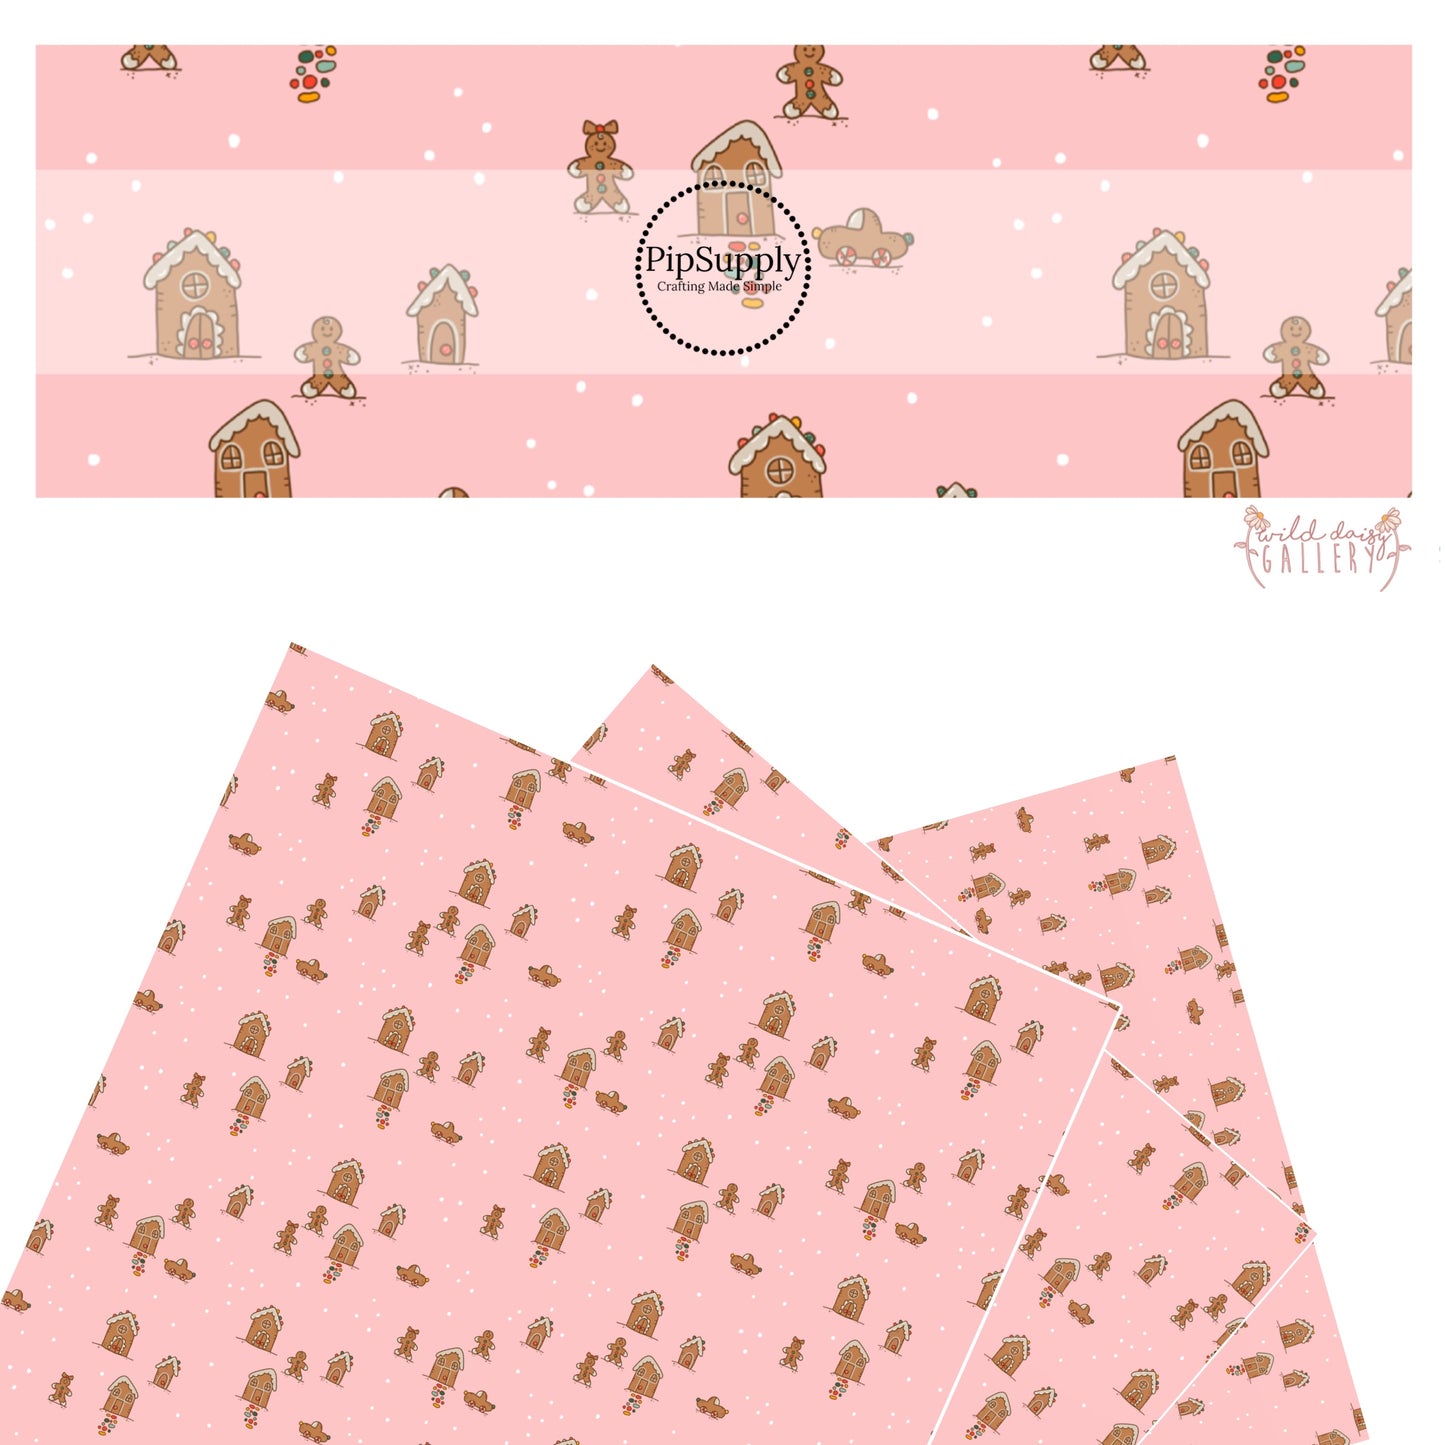 Gingerbread houses with polka dots on pink faux leather sheets